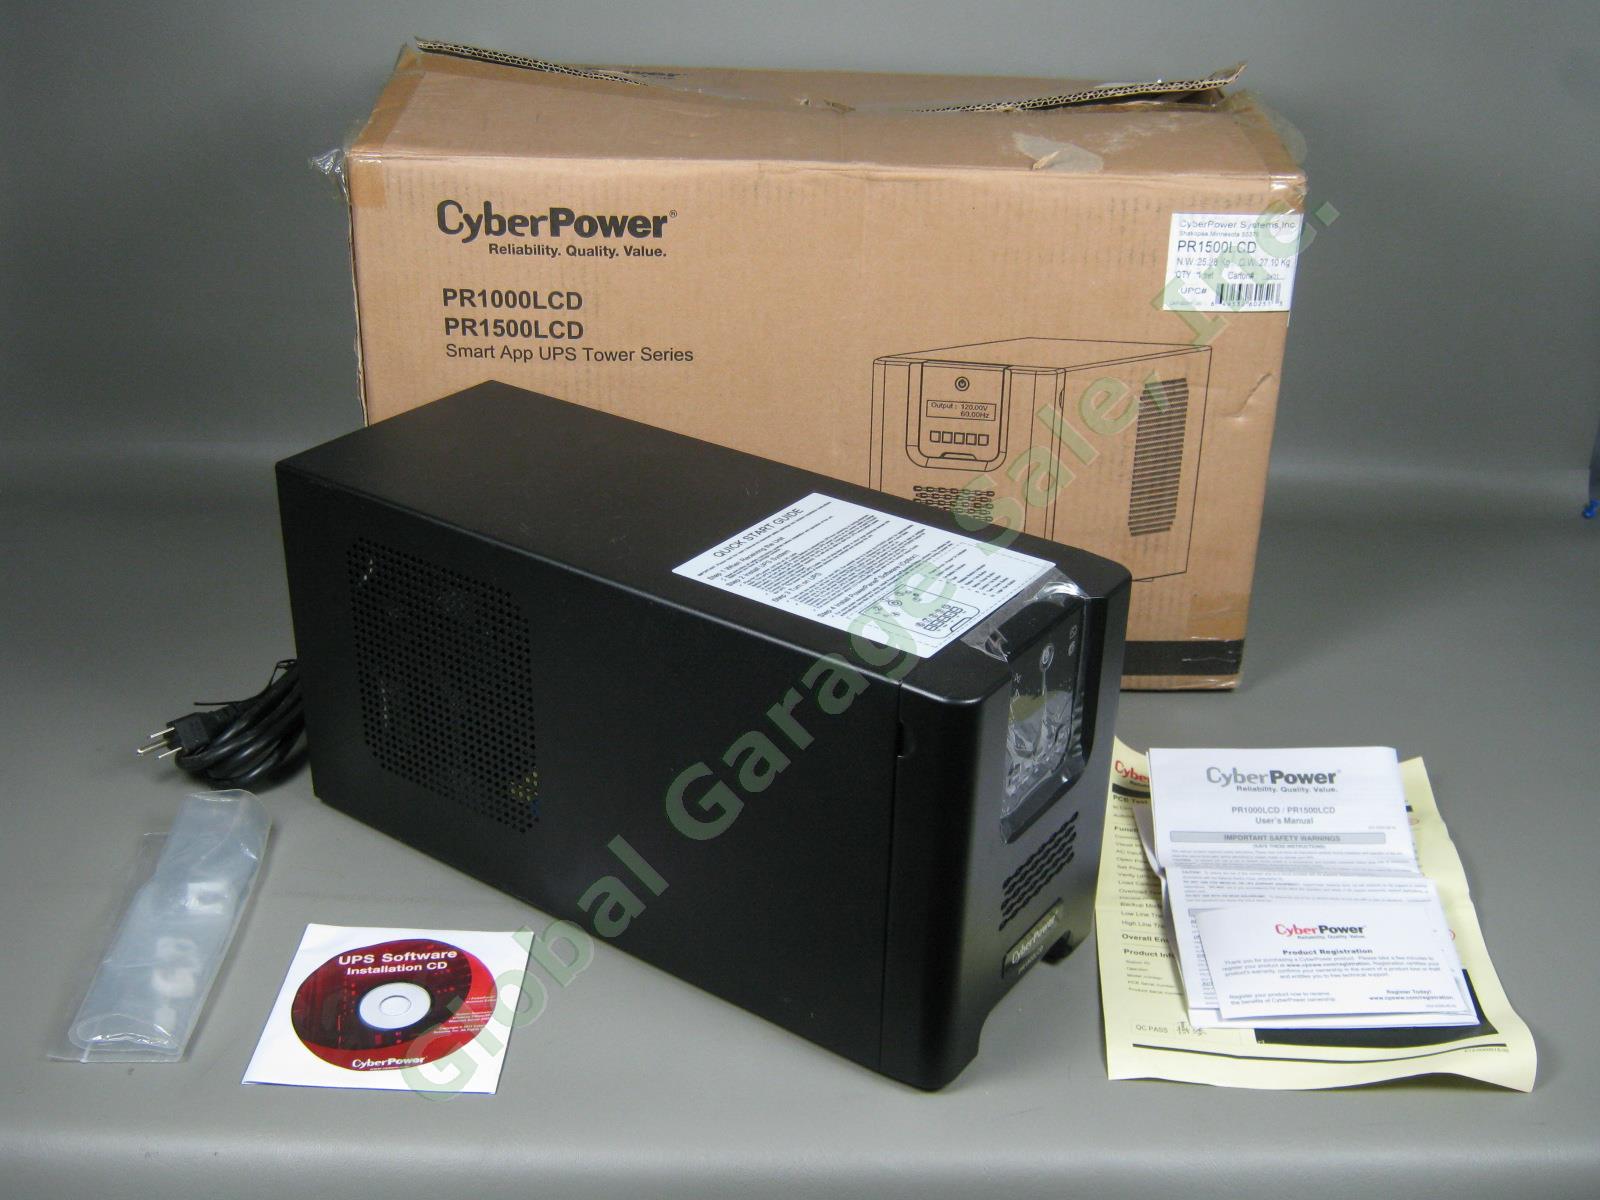 CyberPower PR1500LCD LCD UPS 1500VA 1050W Smart App Sine Wave Tower Barely Used!